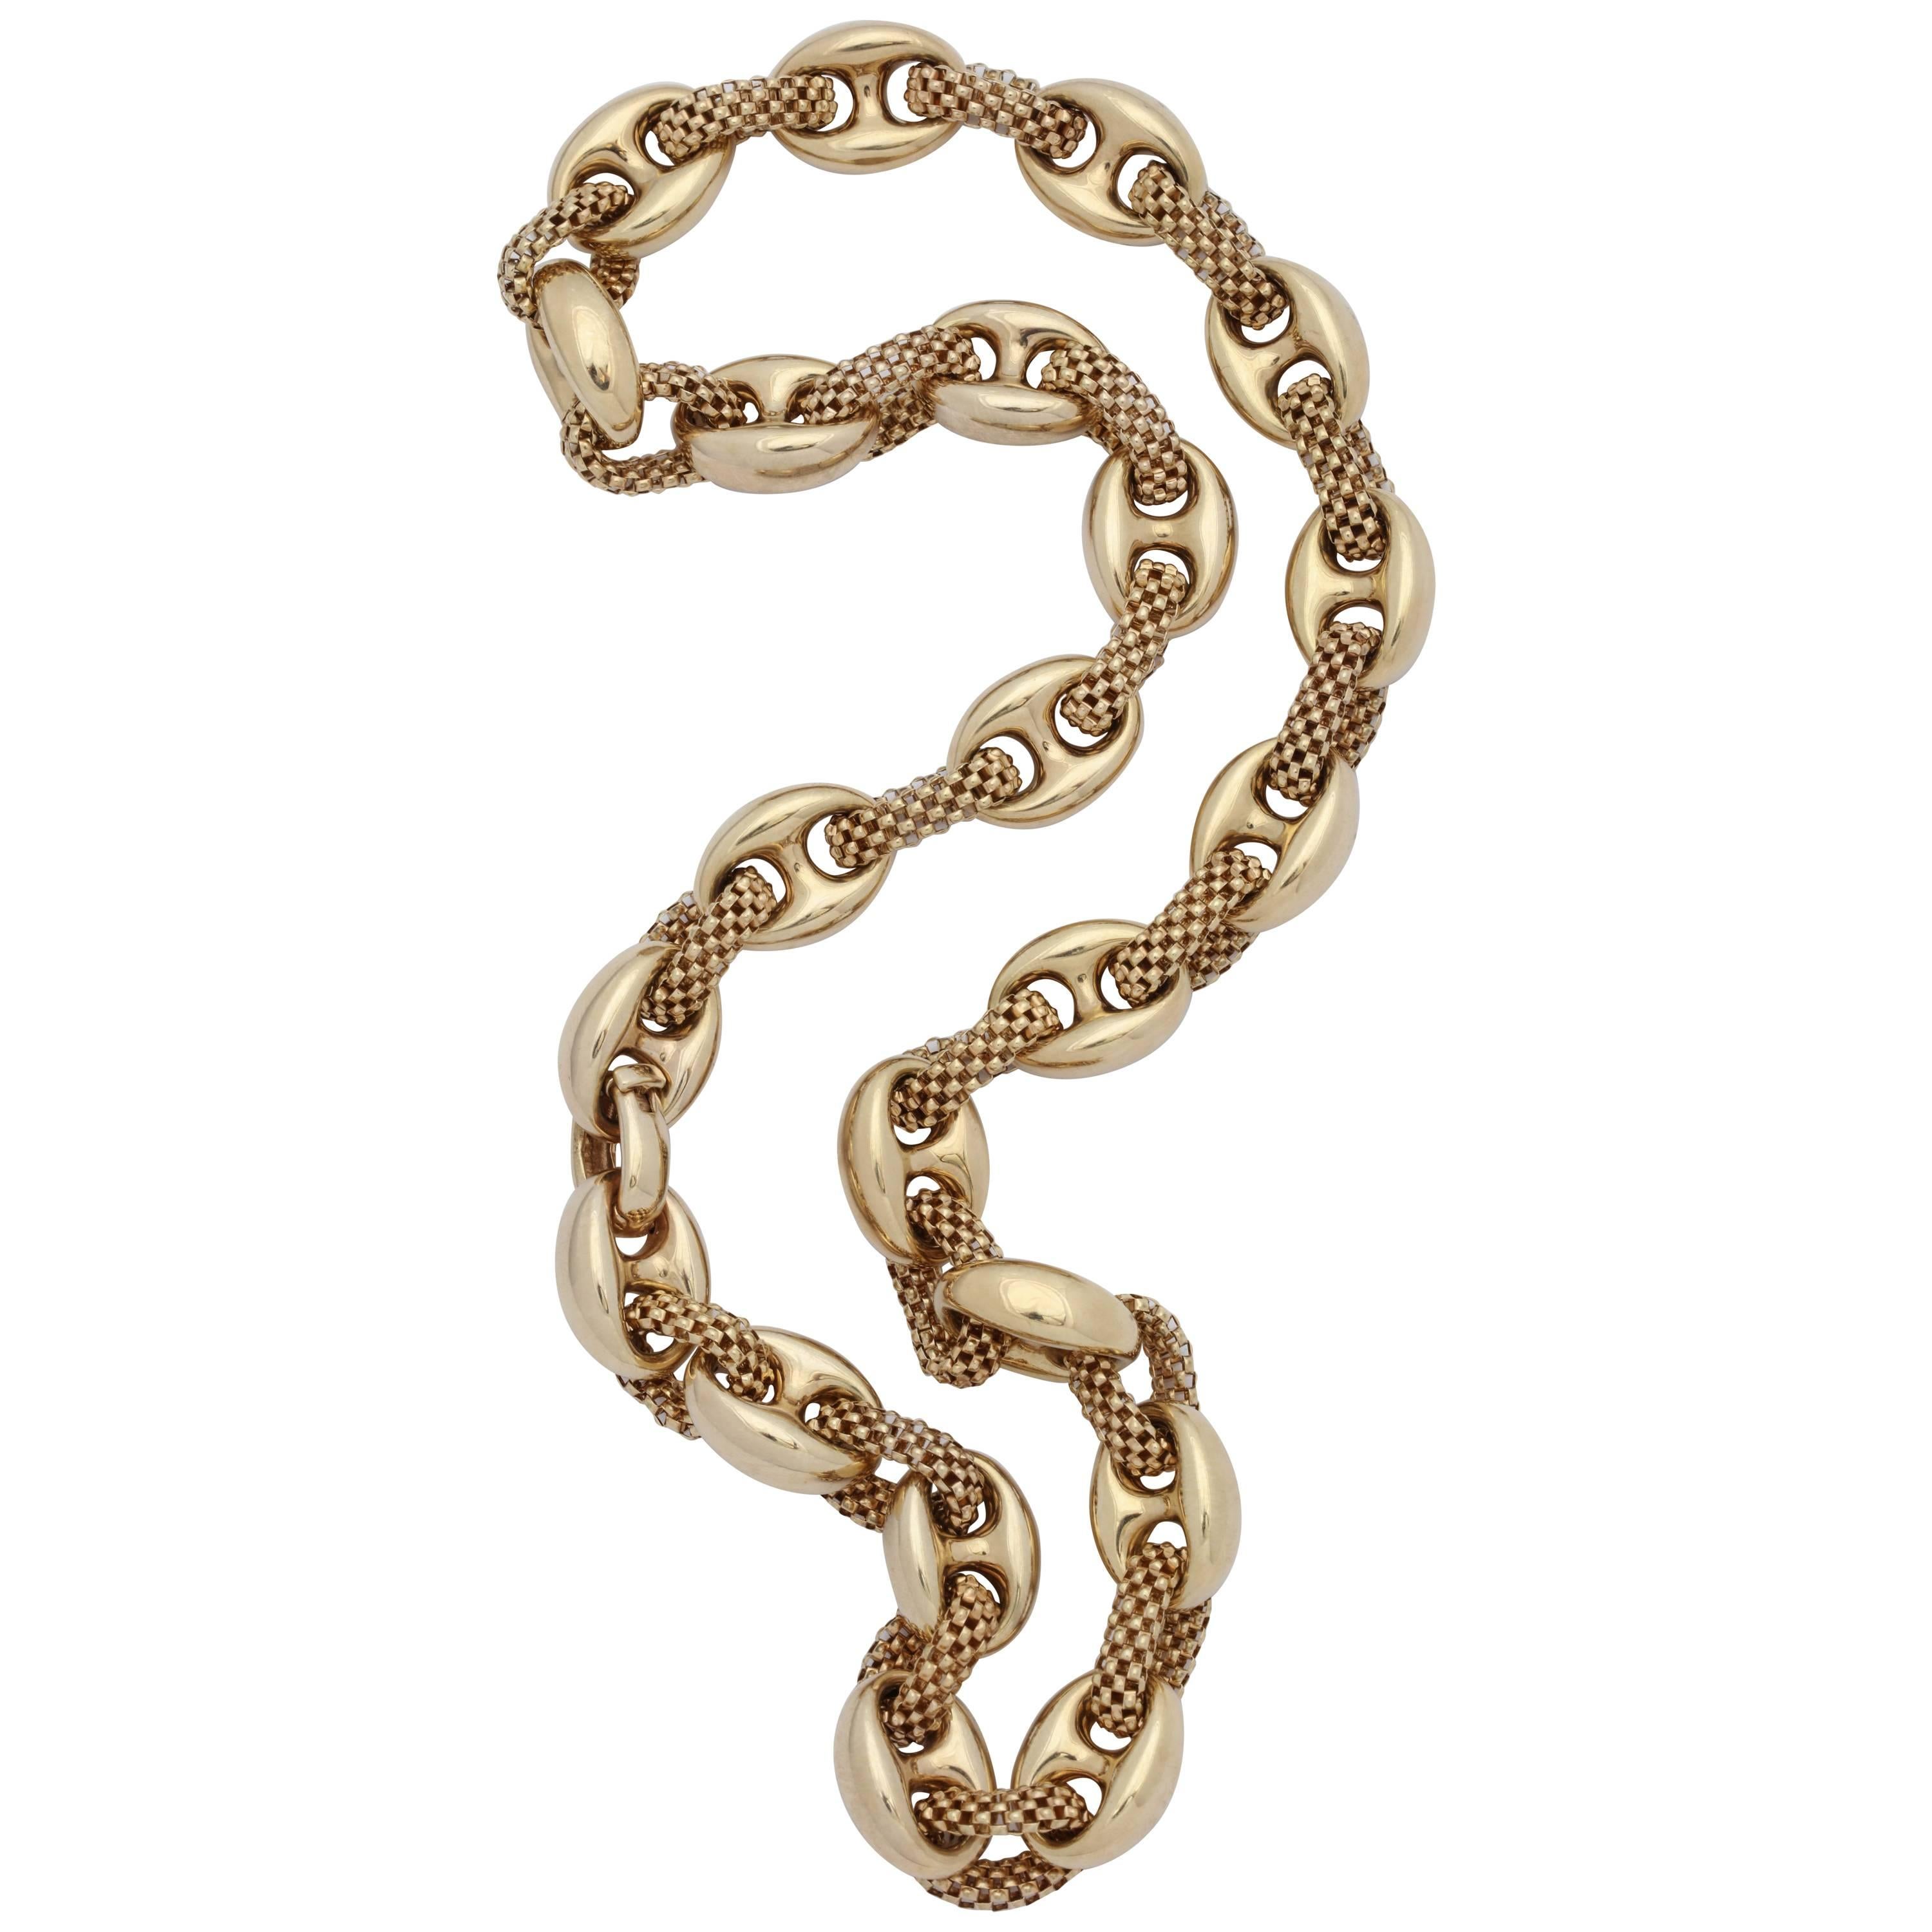 1960s Intertwined Two Textured Box Link and High Polish Gold Link Chain Necklace